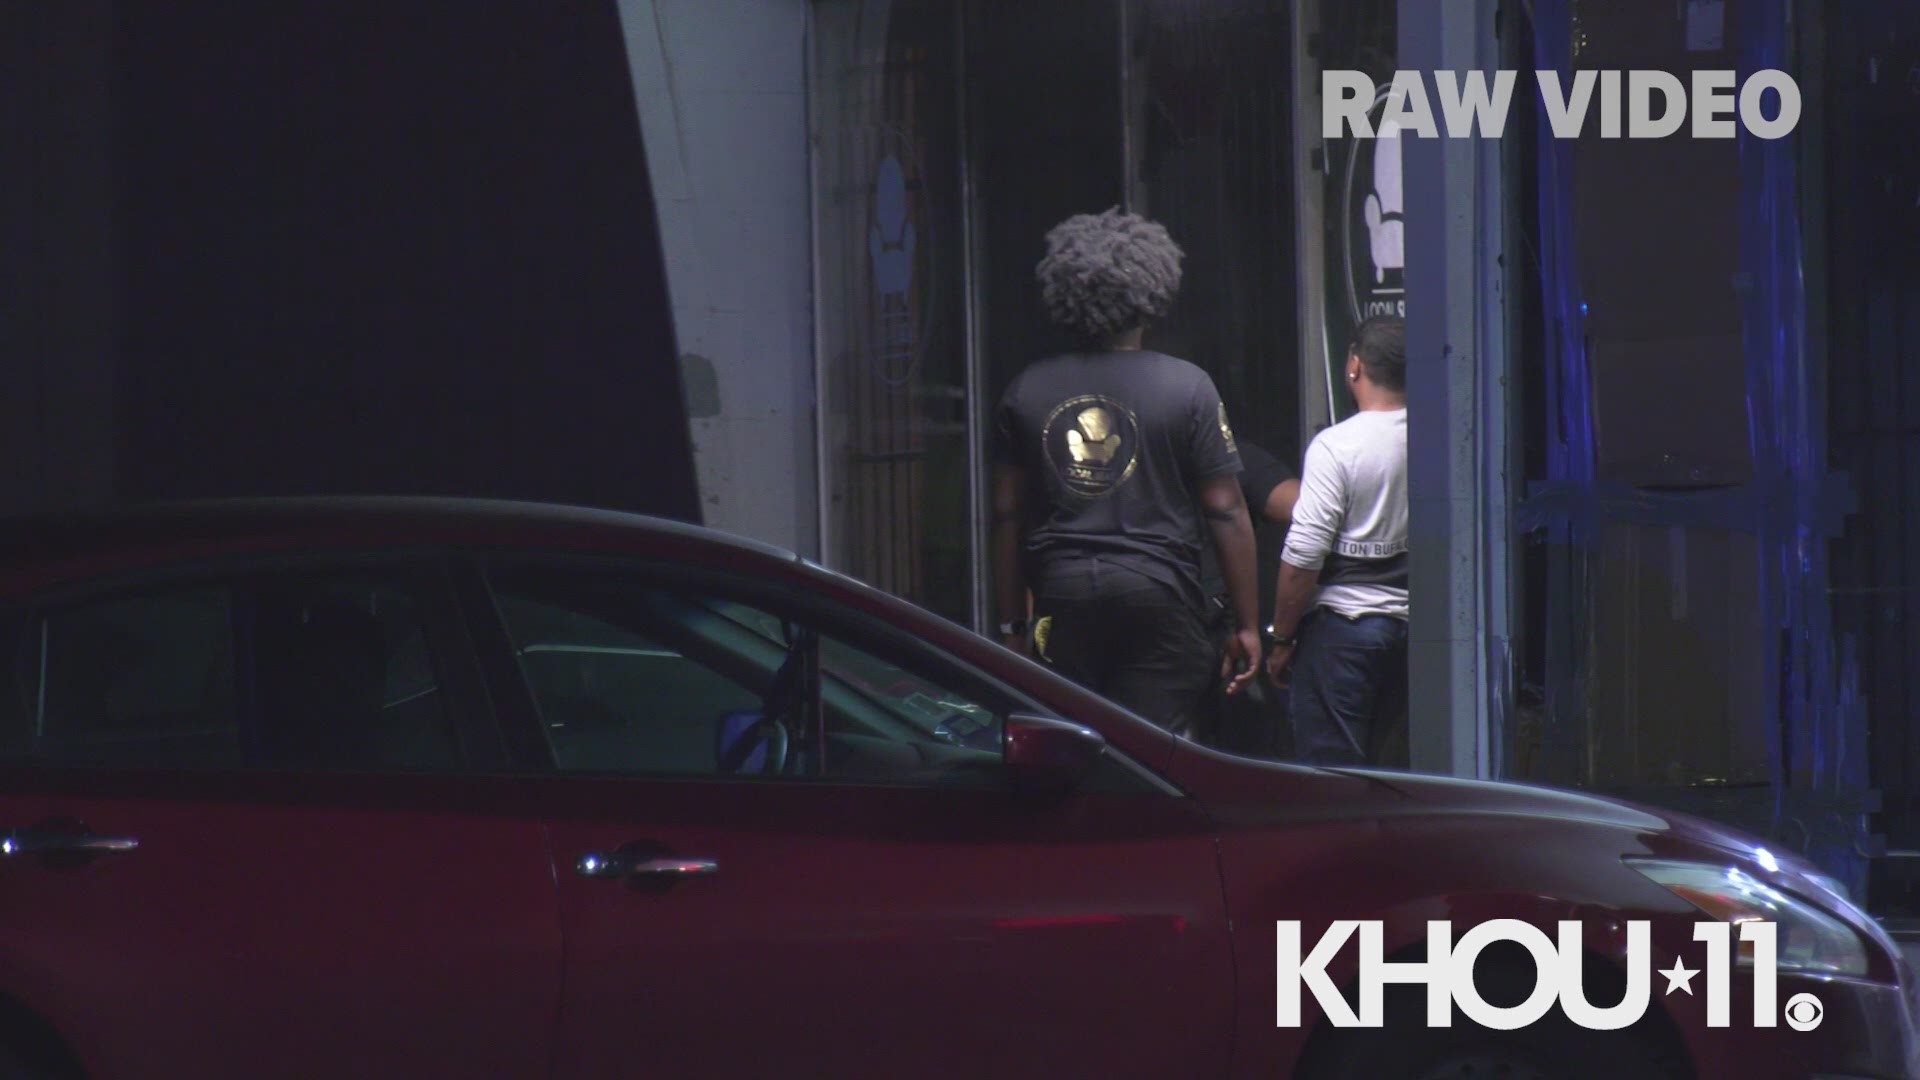 Houston police are investigating a shooting that left three people injured at a local nightclub.